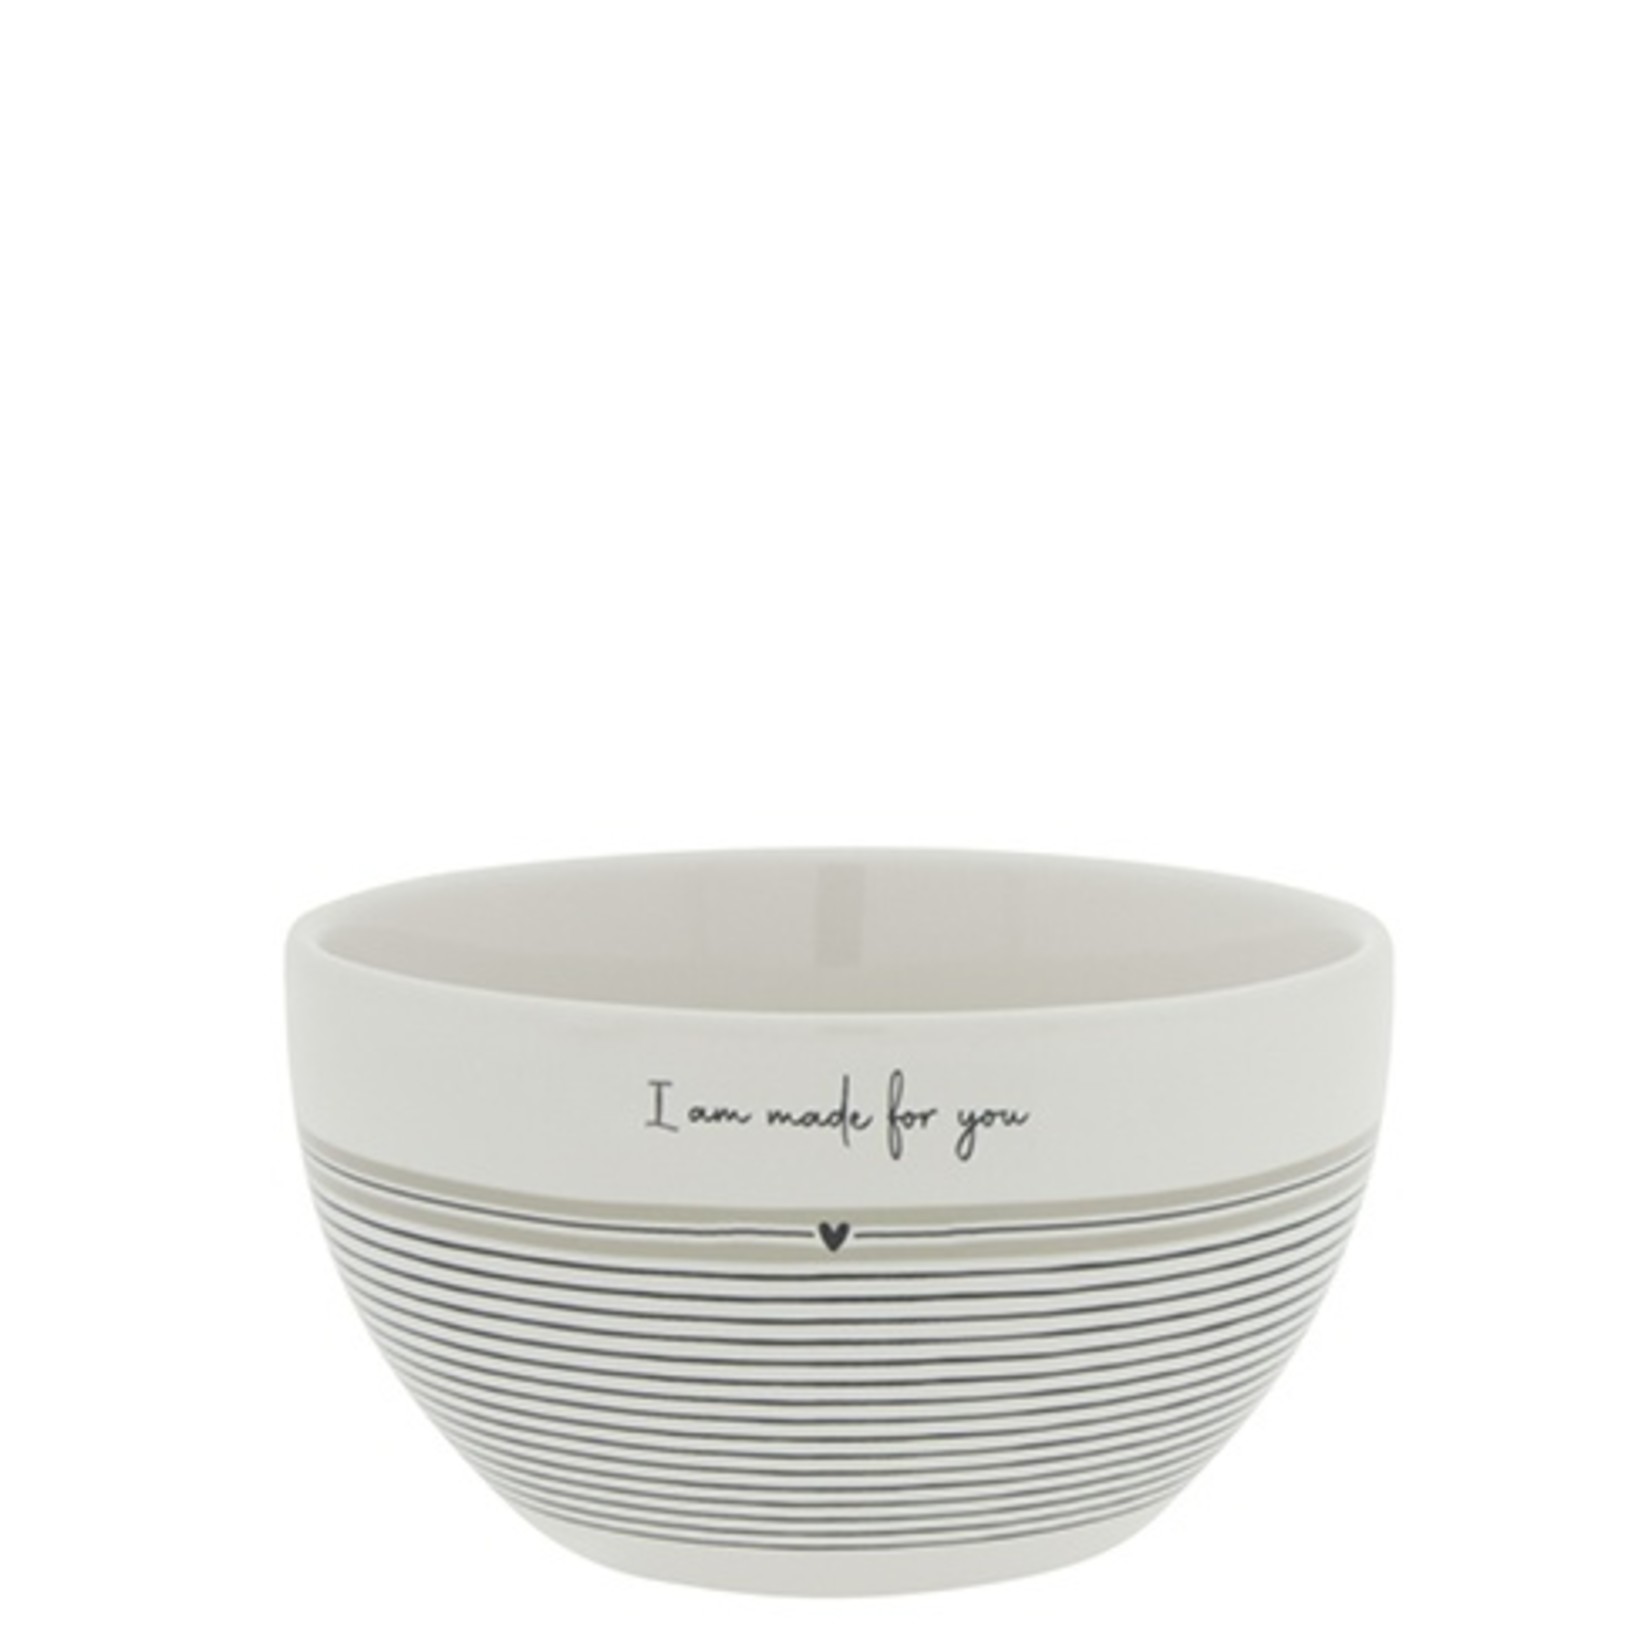 Bastion Collections Bowl White/Stripes Made for You